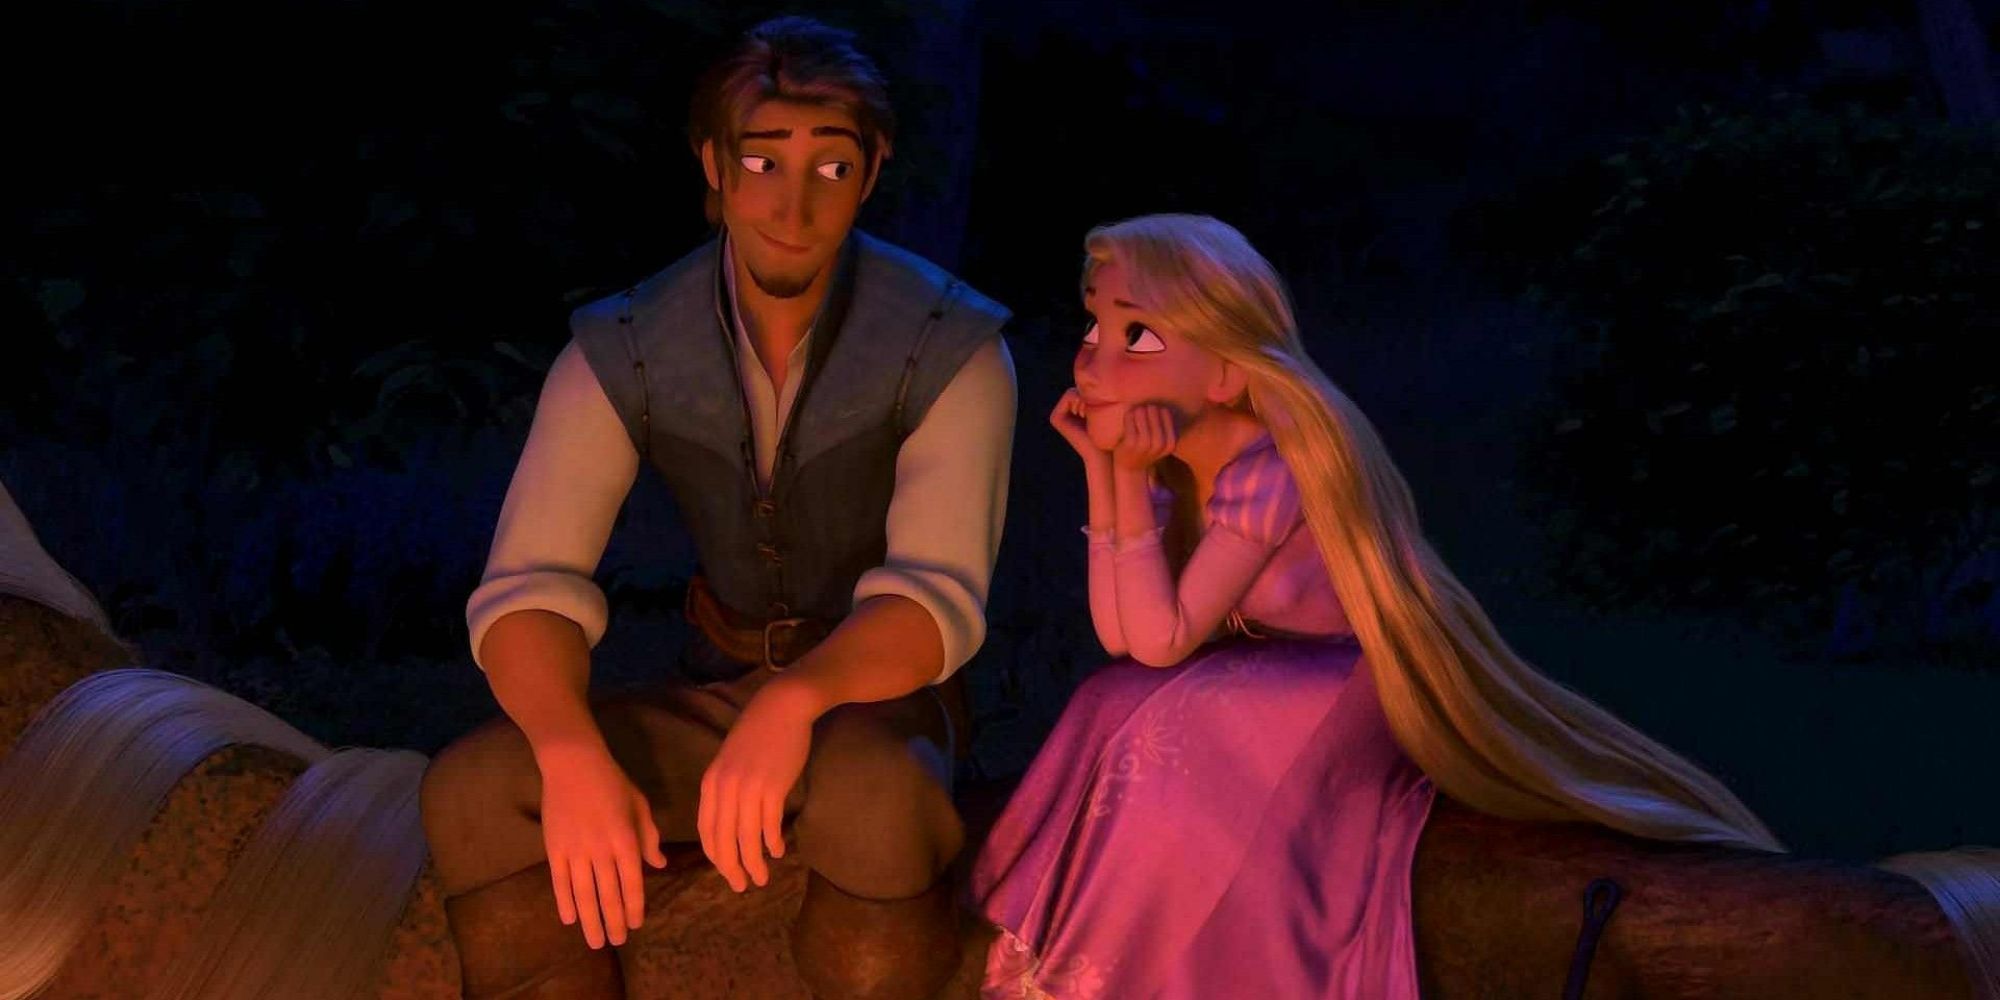 Flynn Rider and Rapunzel by the fire in Tangled